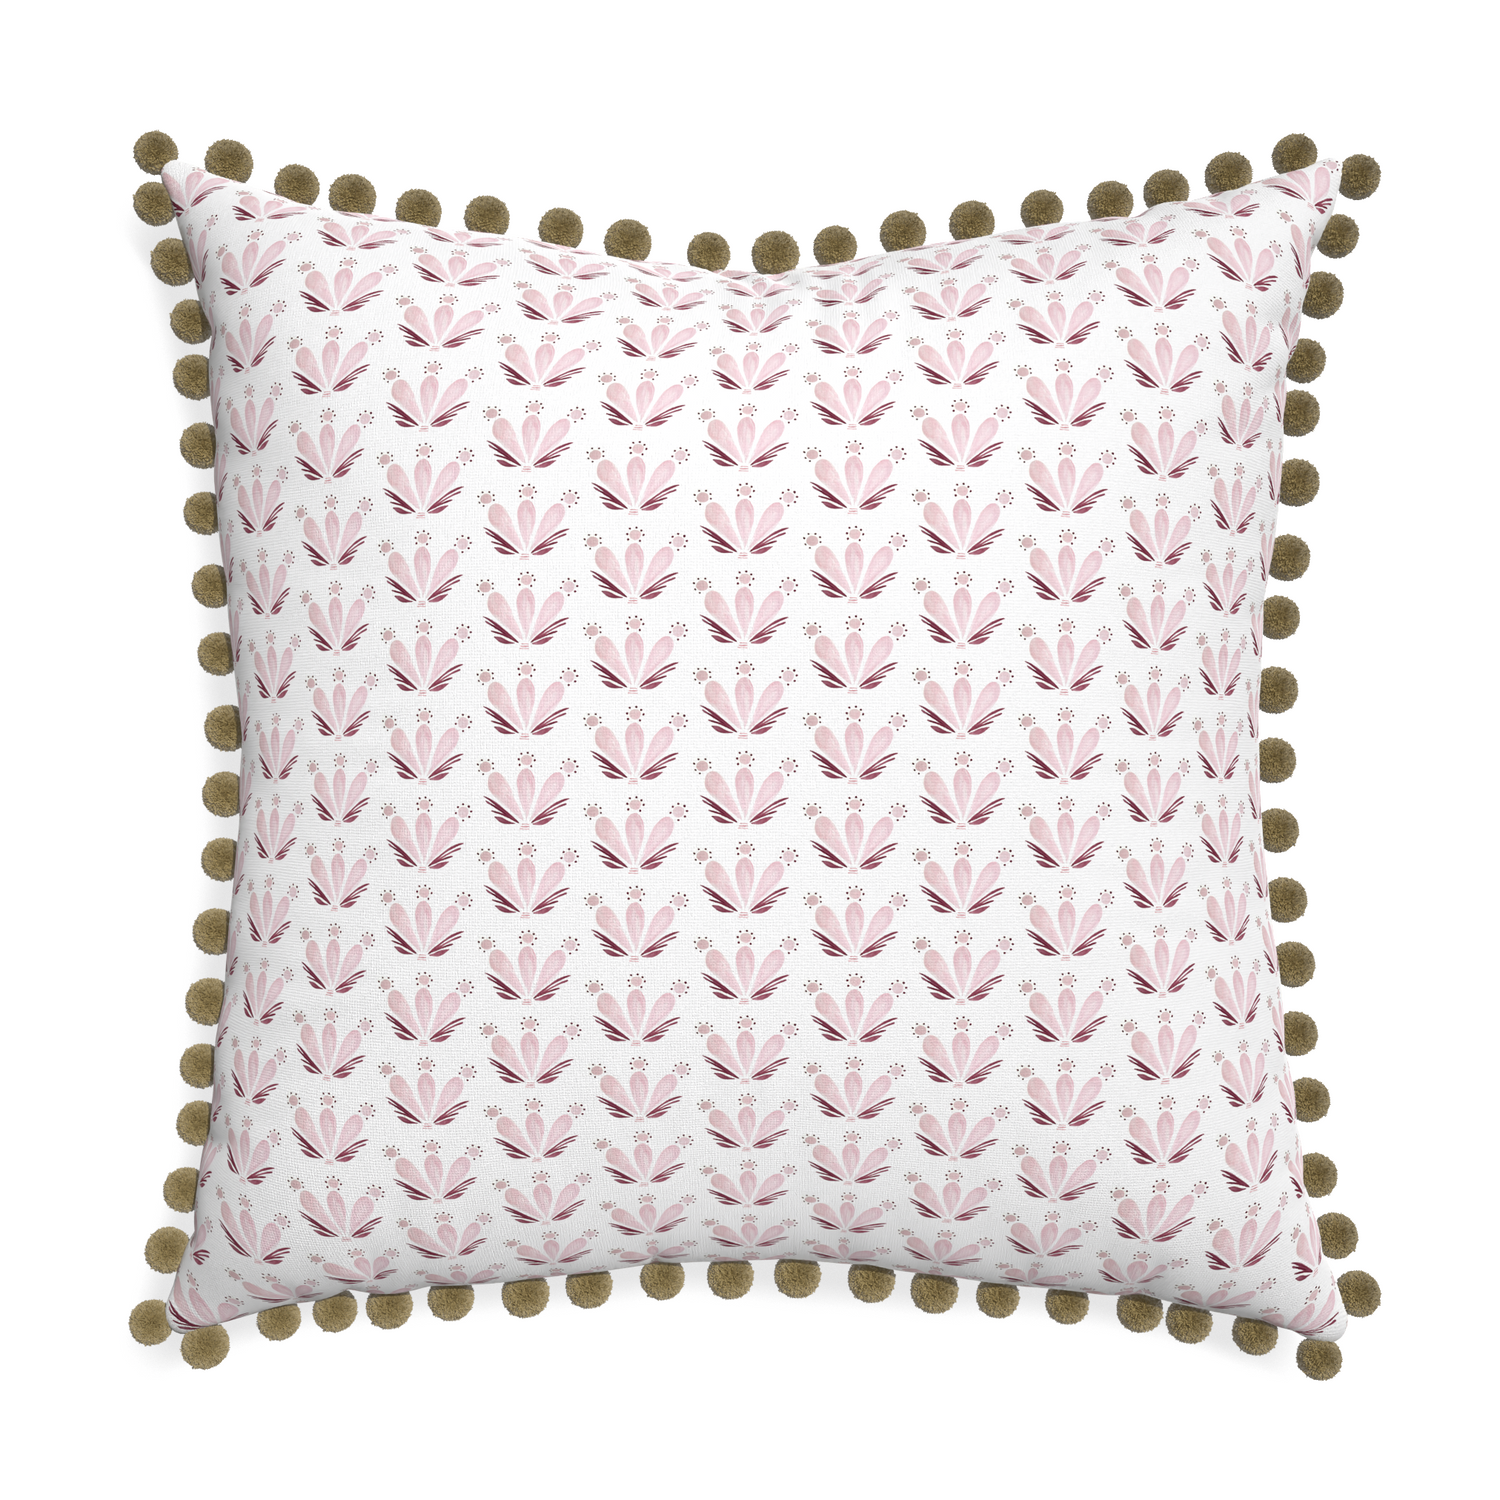 Euro-sham serena pink custom pink & burgundy drop repeat floralpillow with olive pom pom on white background